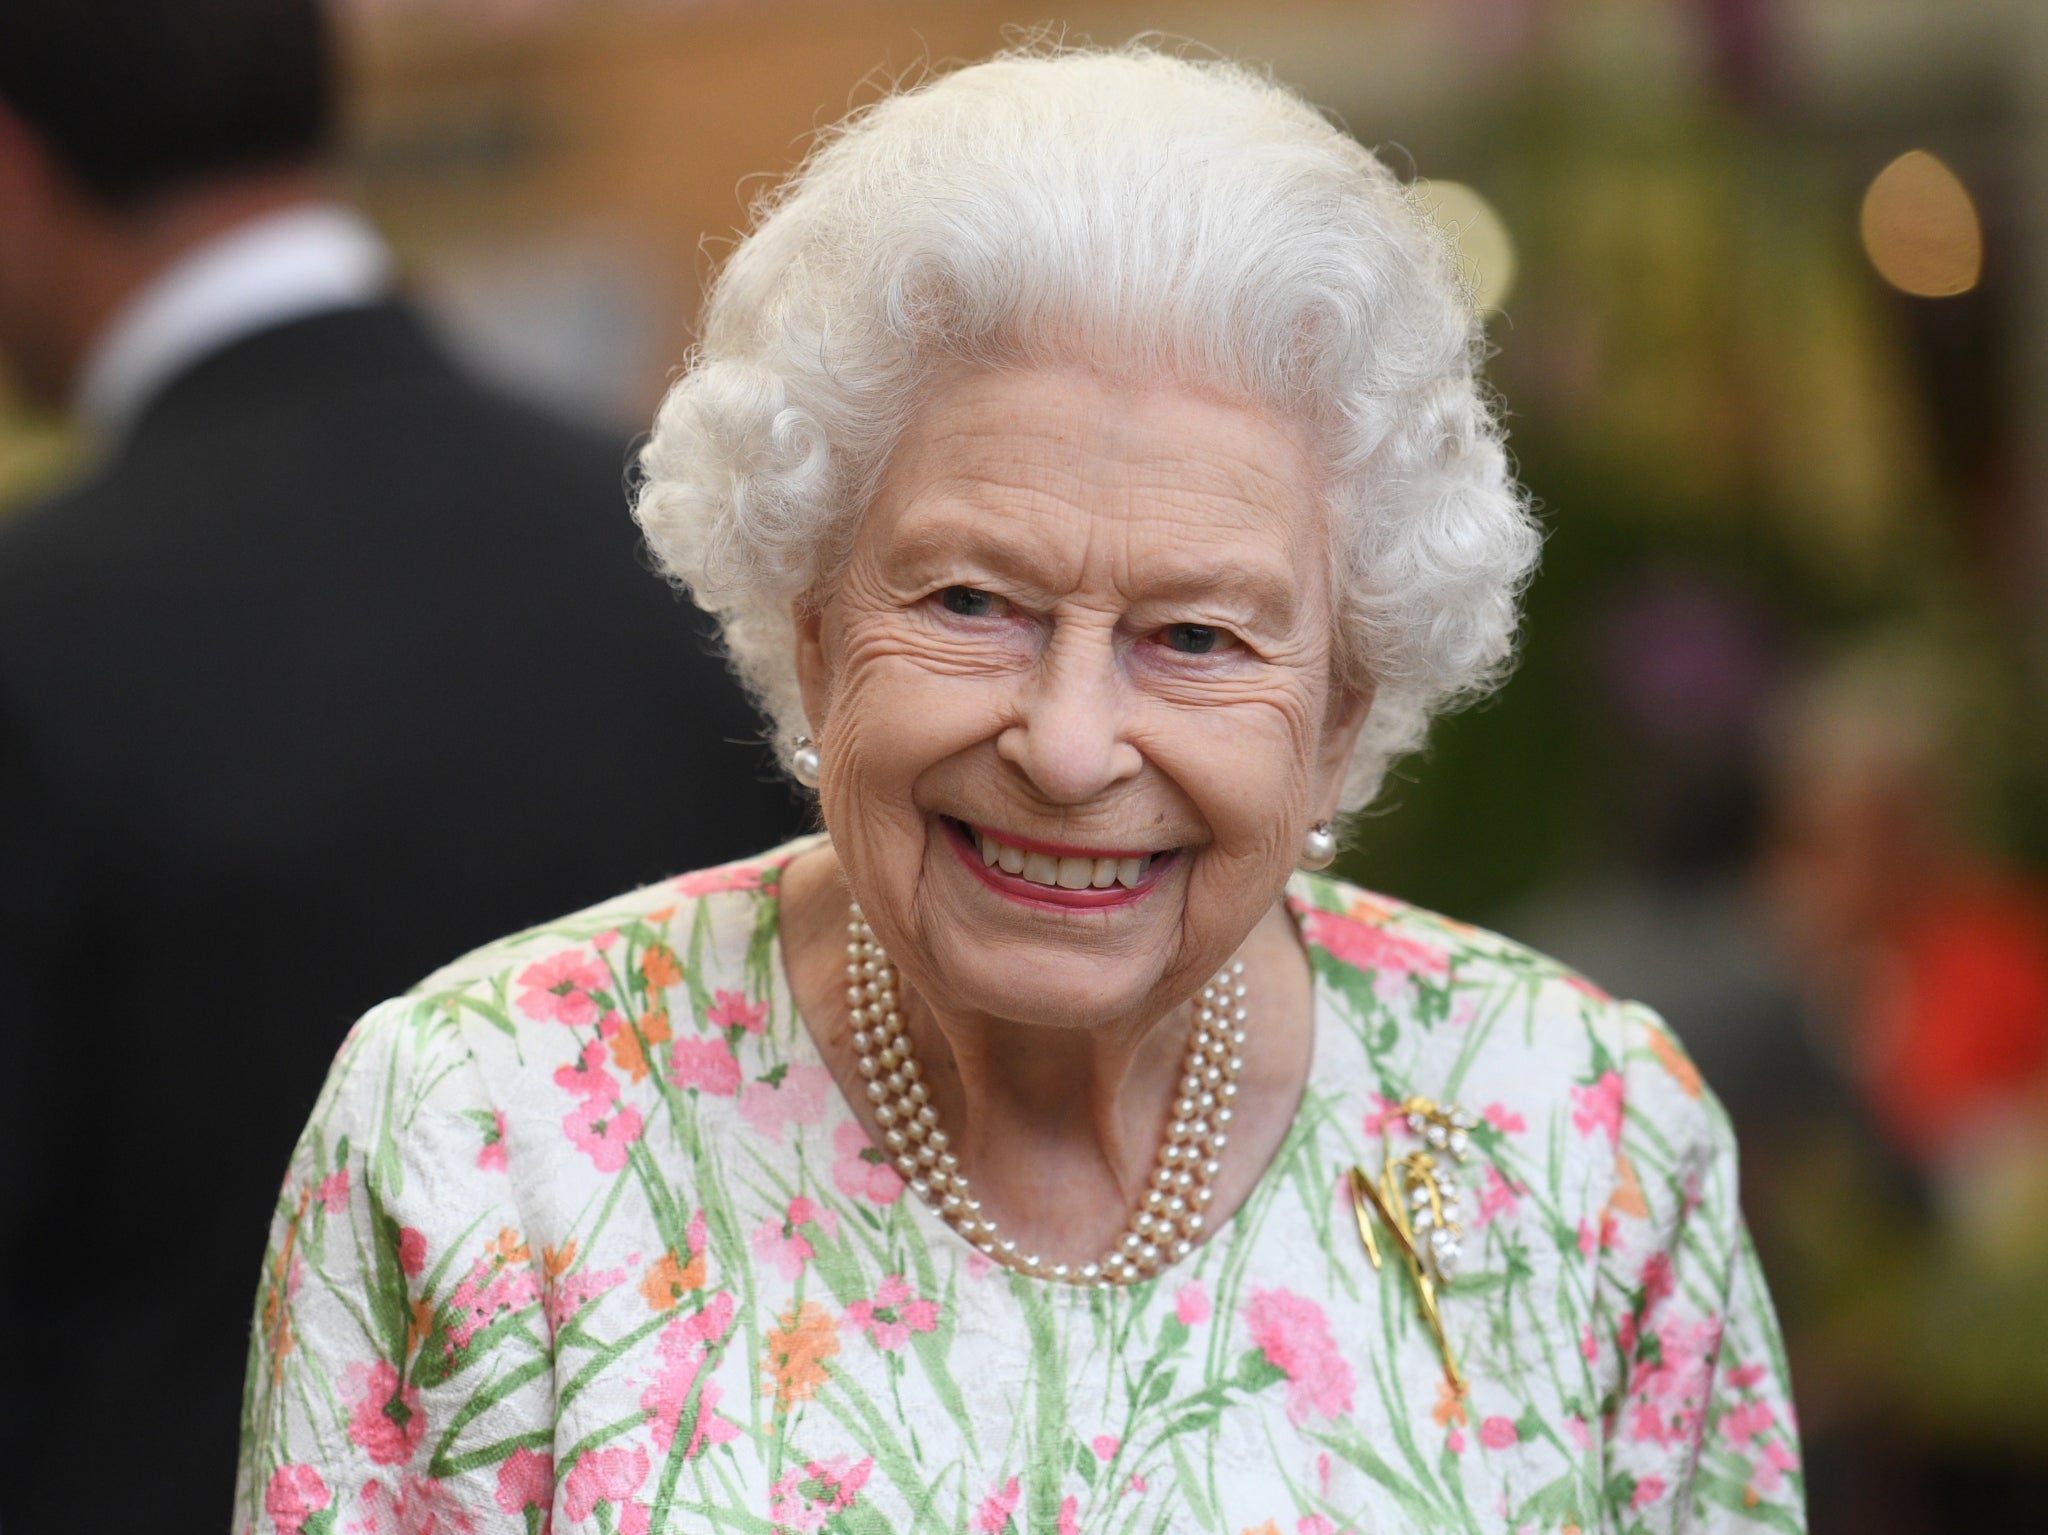 The 96-year-old monarch has been facing mobility issues since she was hospitalised in October last year